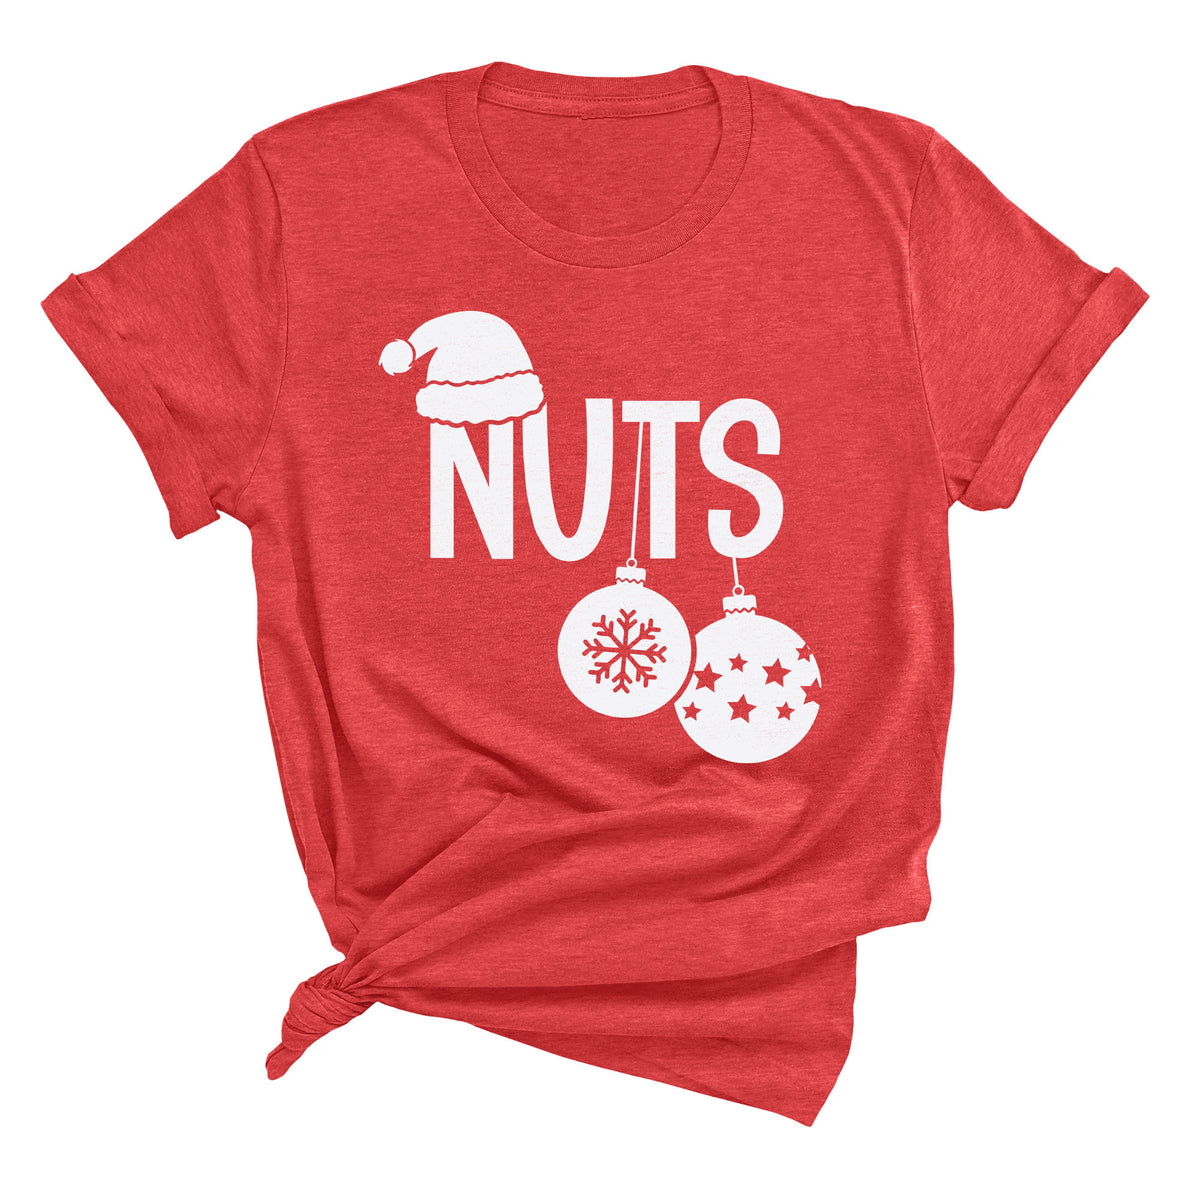 Chest / Nuts Unisex T-Shirt